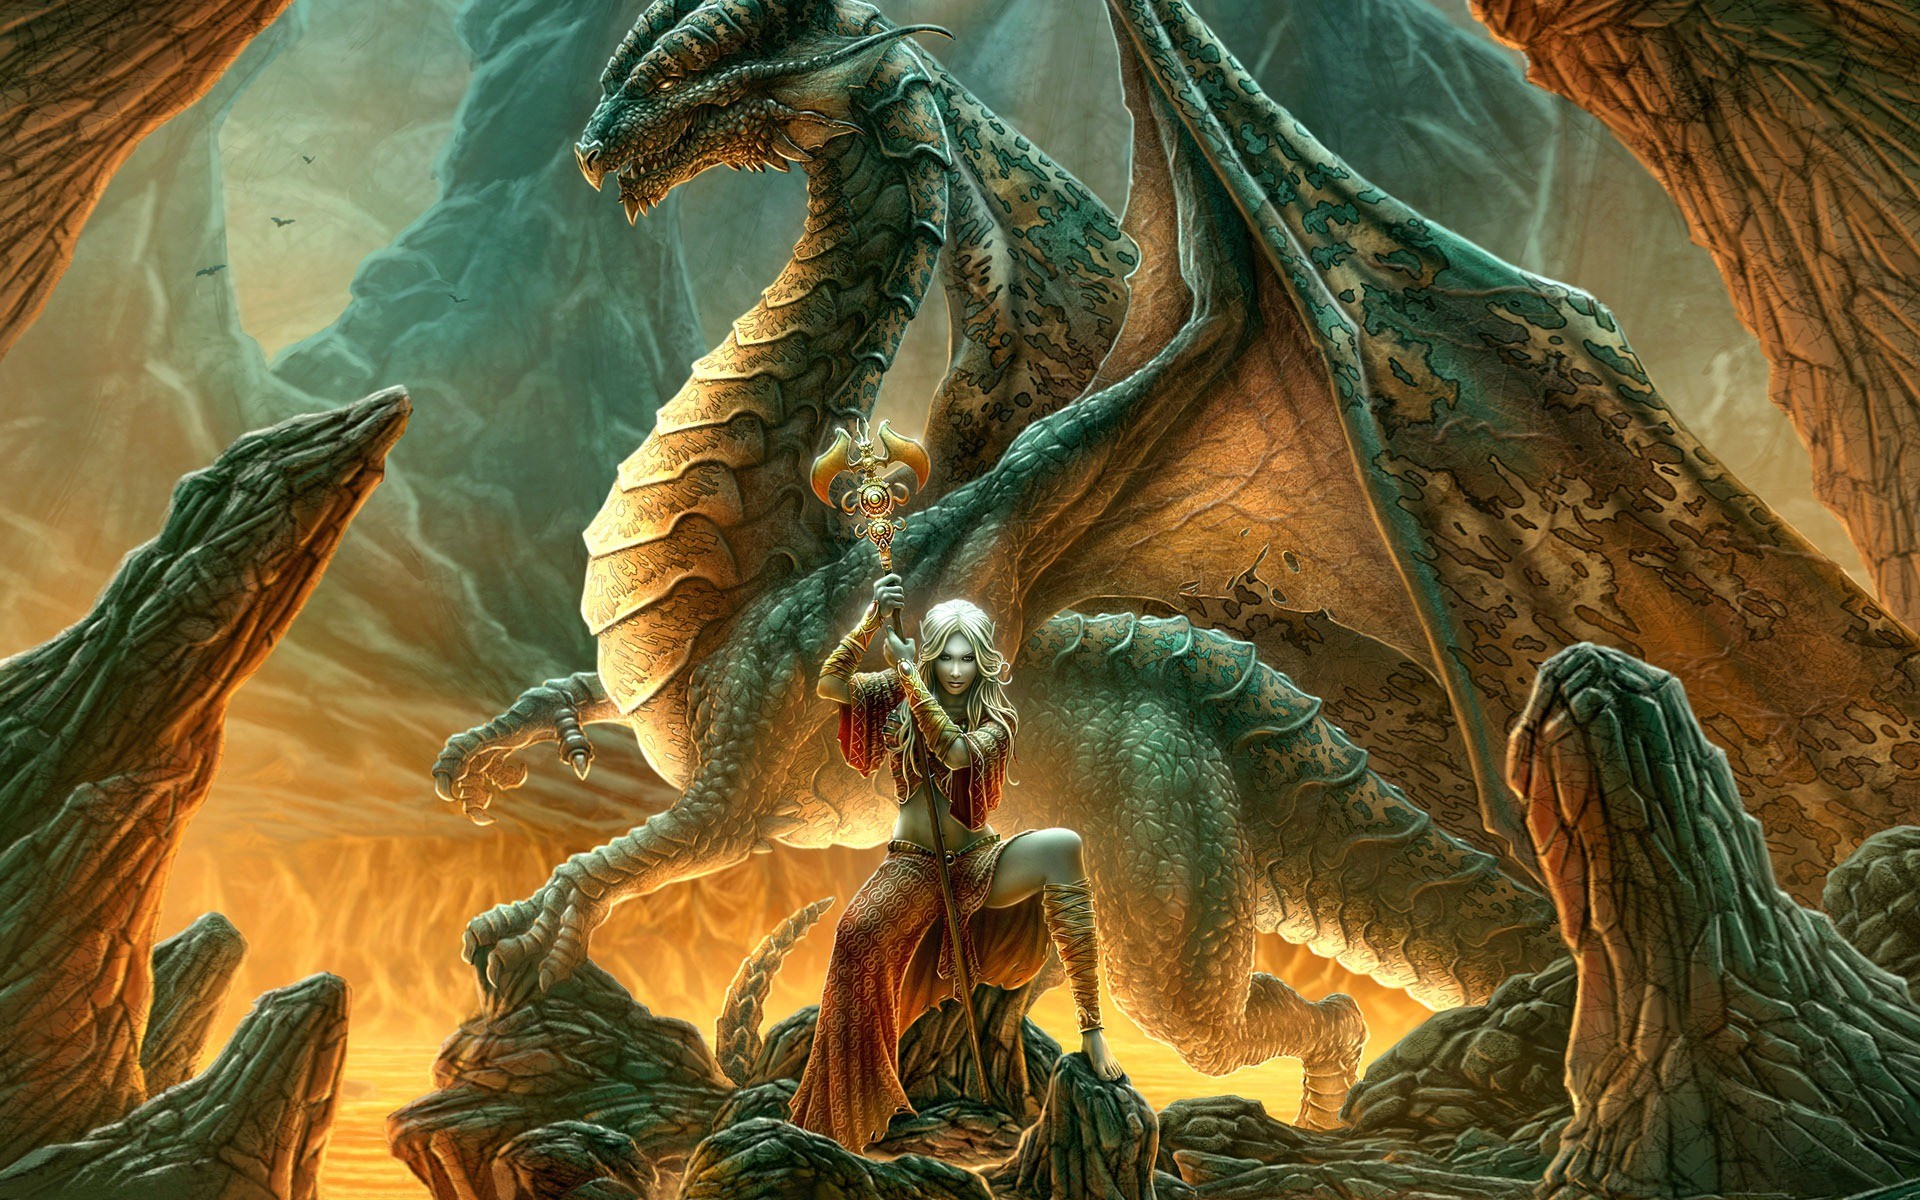 The Dragon Wallpapers Android Apps on Google Play